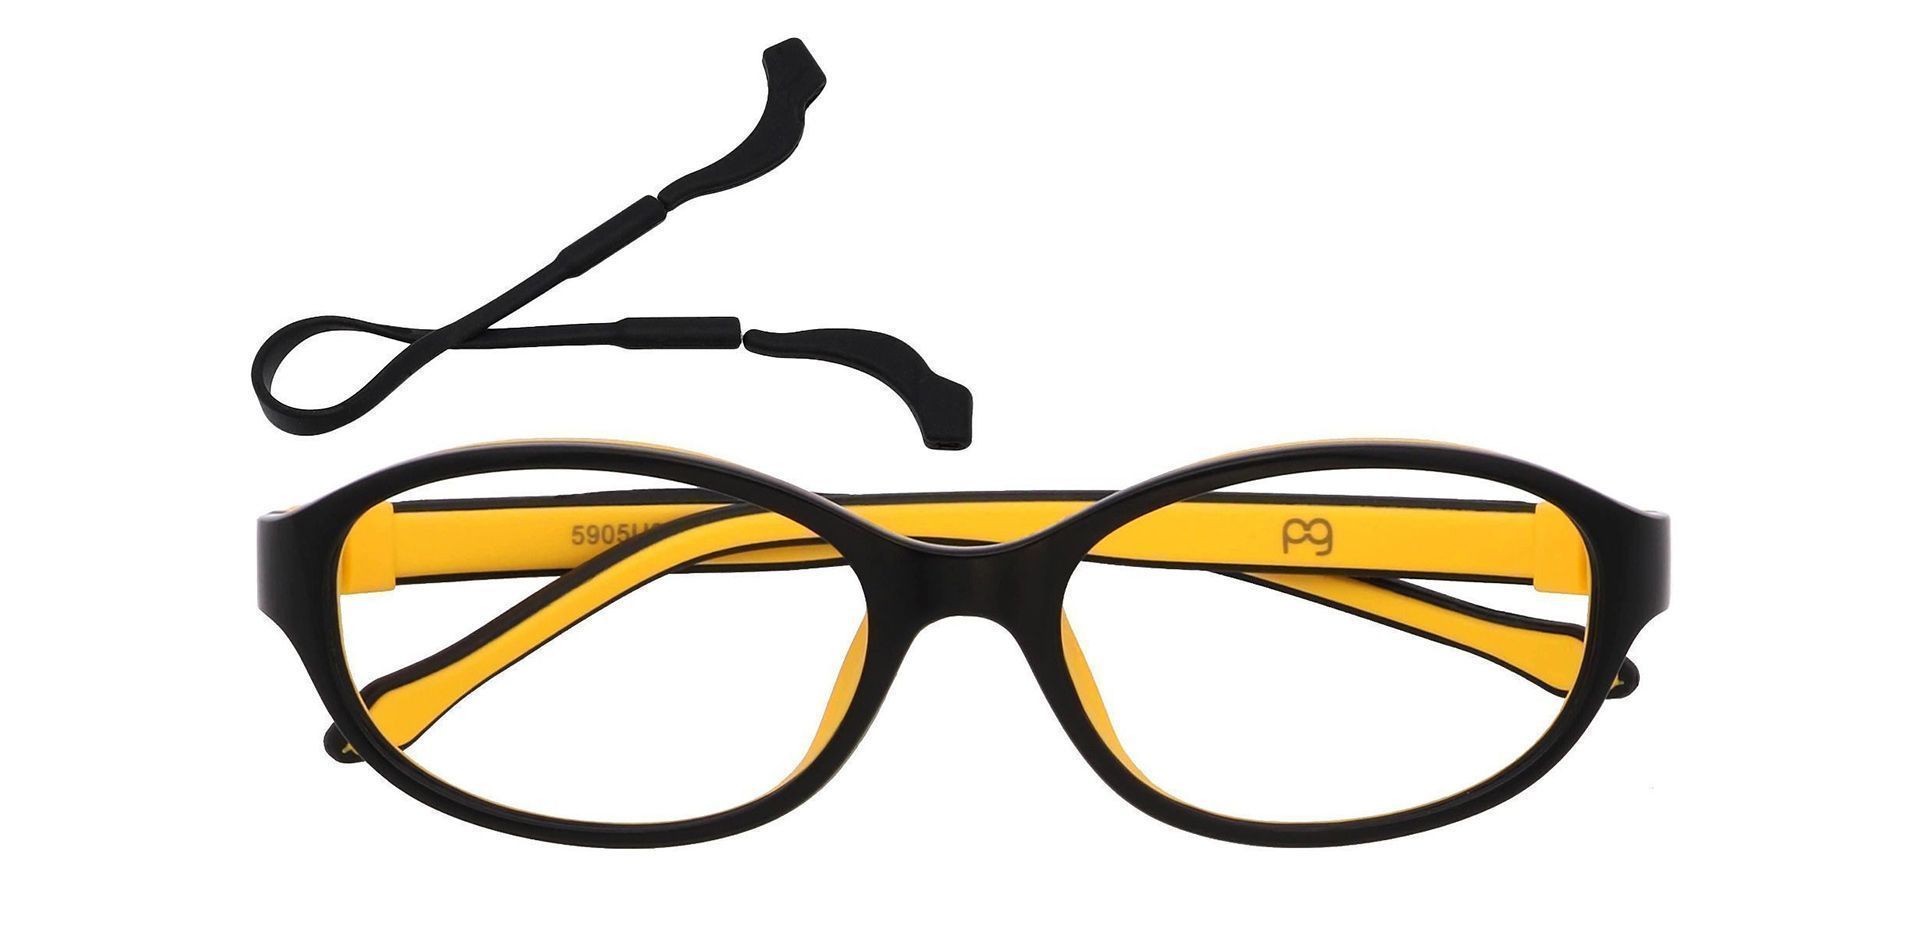 Stone Oval Non-Rx Glasses - The Frame Is Black And Yellow